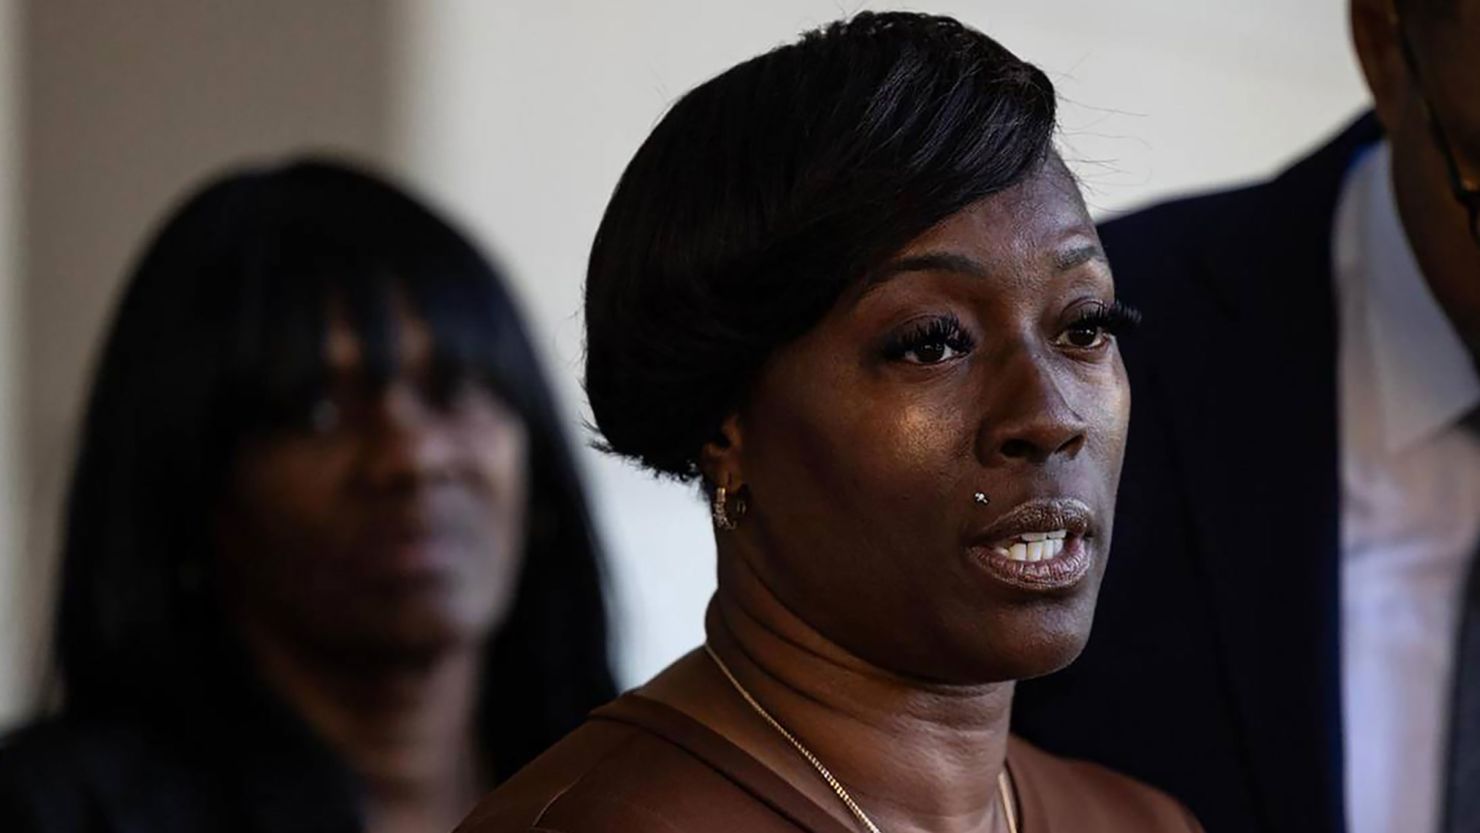 Crystal Mason and her attorneys speak to the media gathered regarding her acquittal in a high-profile voting rights case at the Tim Curry Criminal Justice Center on March 29, 2024, in Fort Worth, Texas.